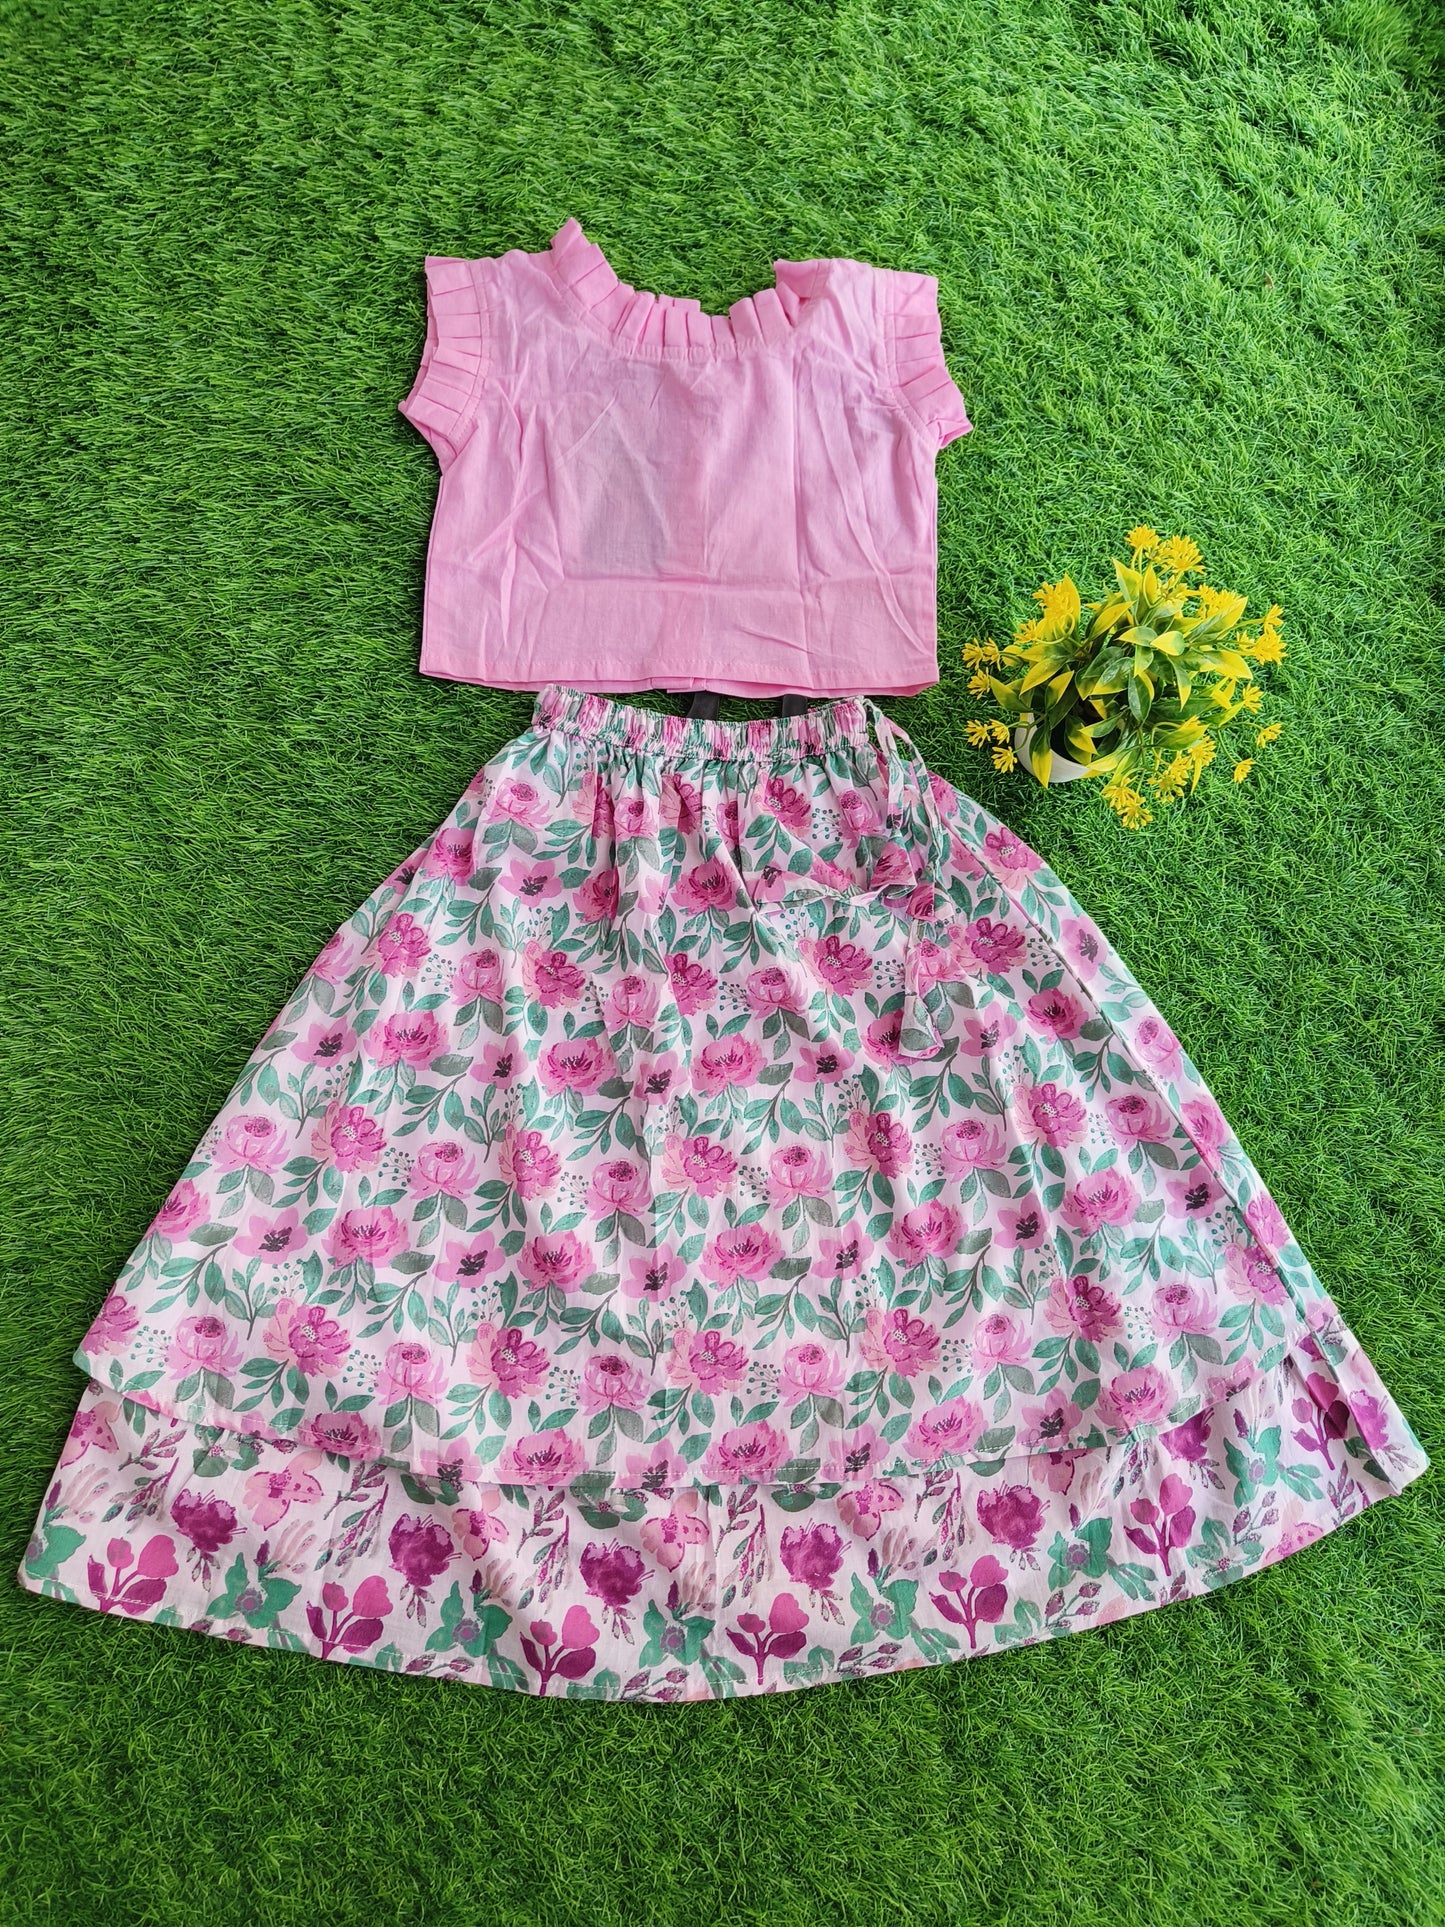 Classic Plain Pink Kurti and Rose Flower Printed Lehenga Outfit for Girl